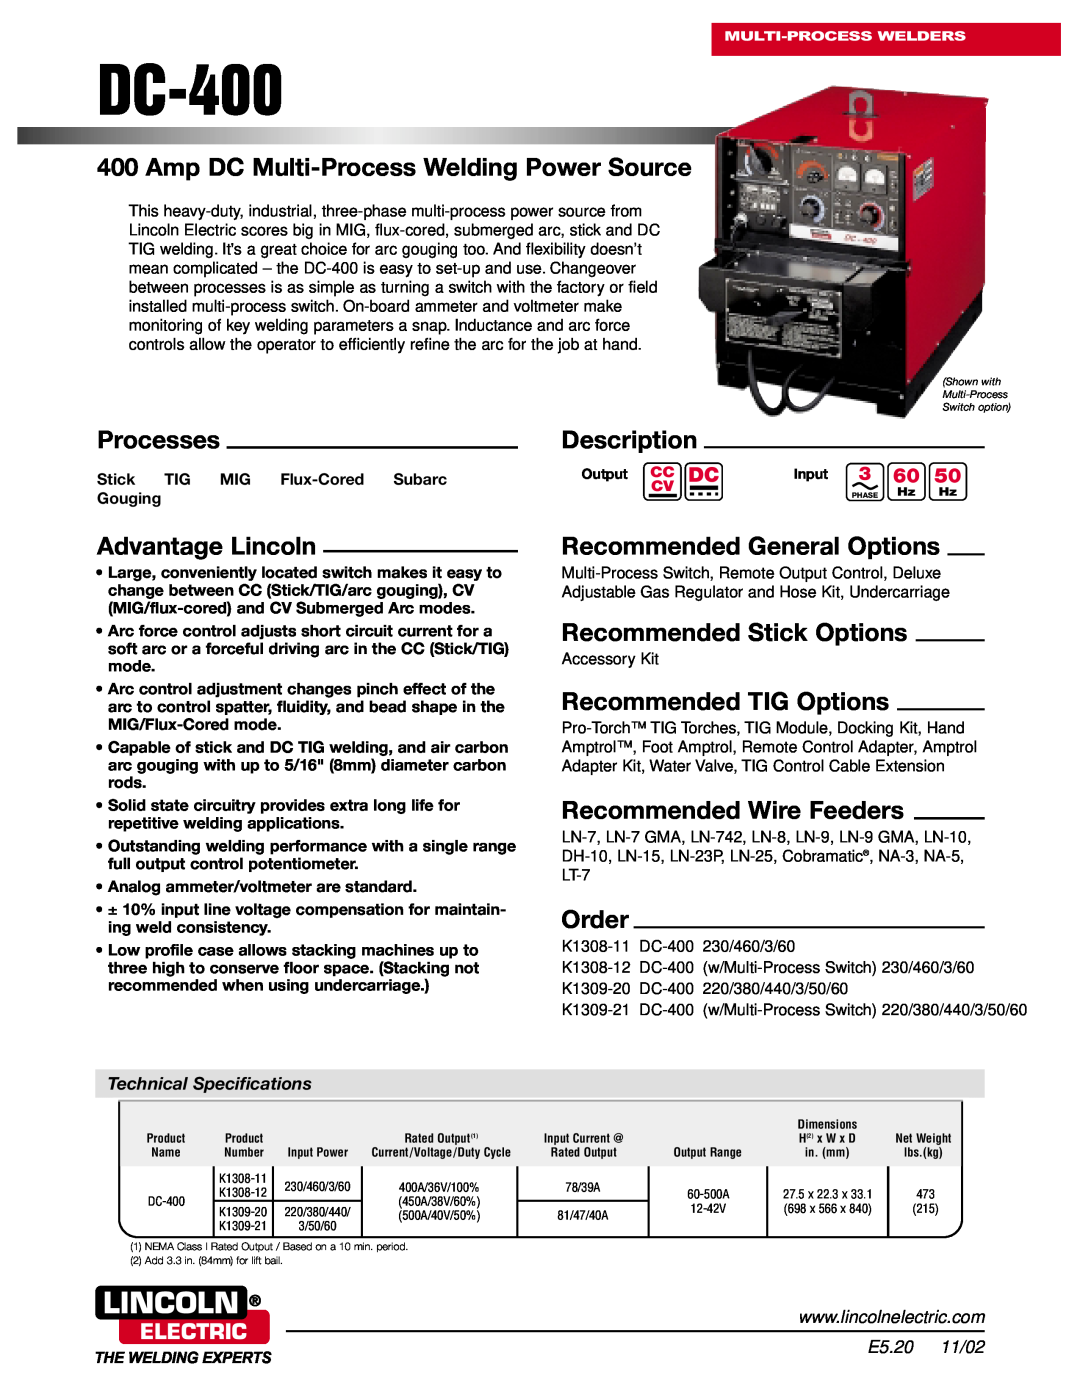 Lincoln Electric K1308-12 technical specifications Amp DC Multi-Process Welding Power Source, Processes, Advantage Lincoln 